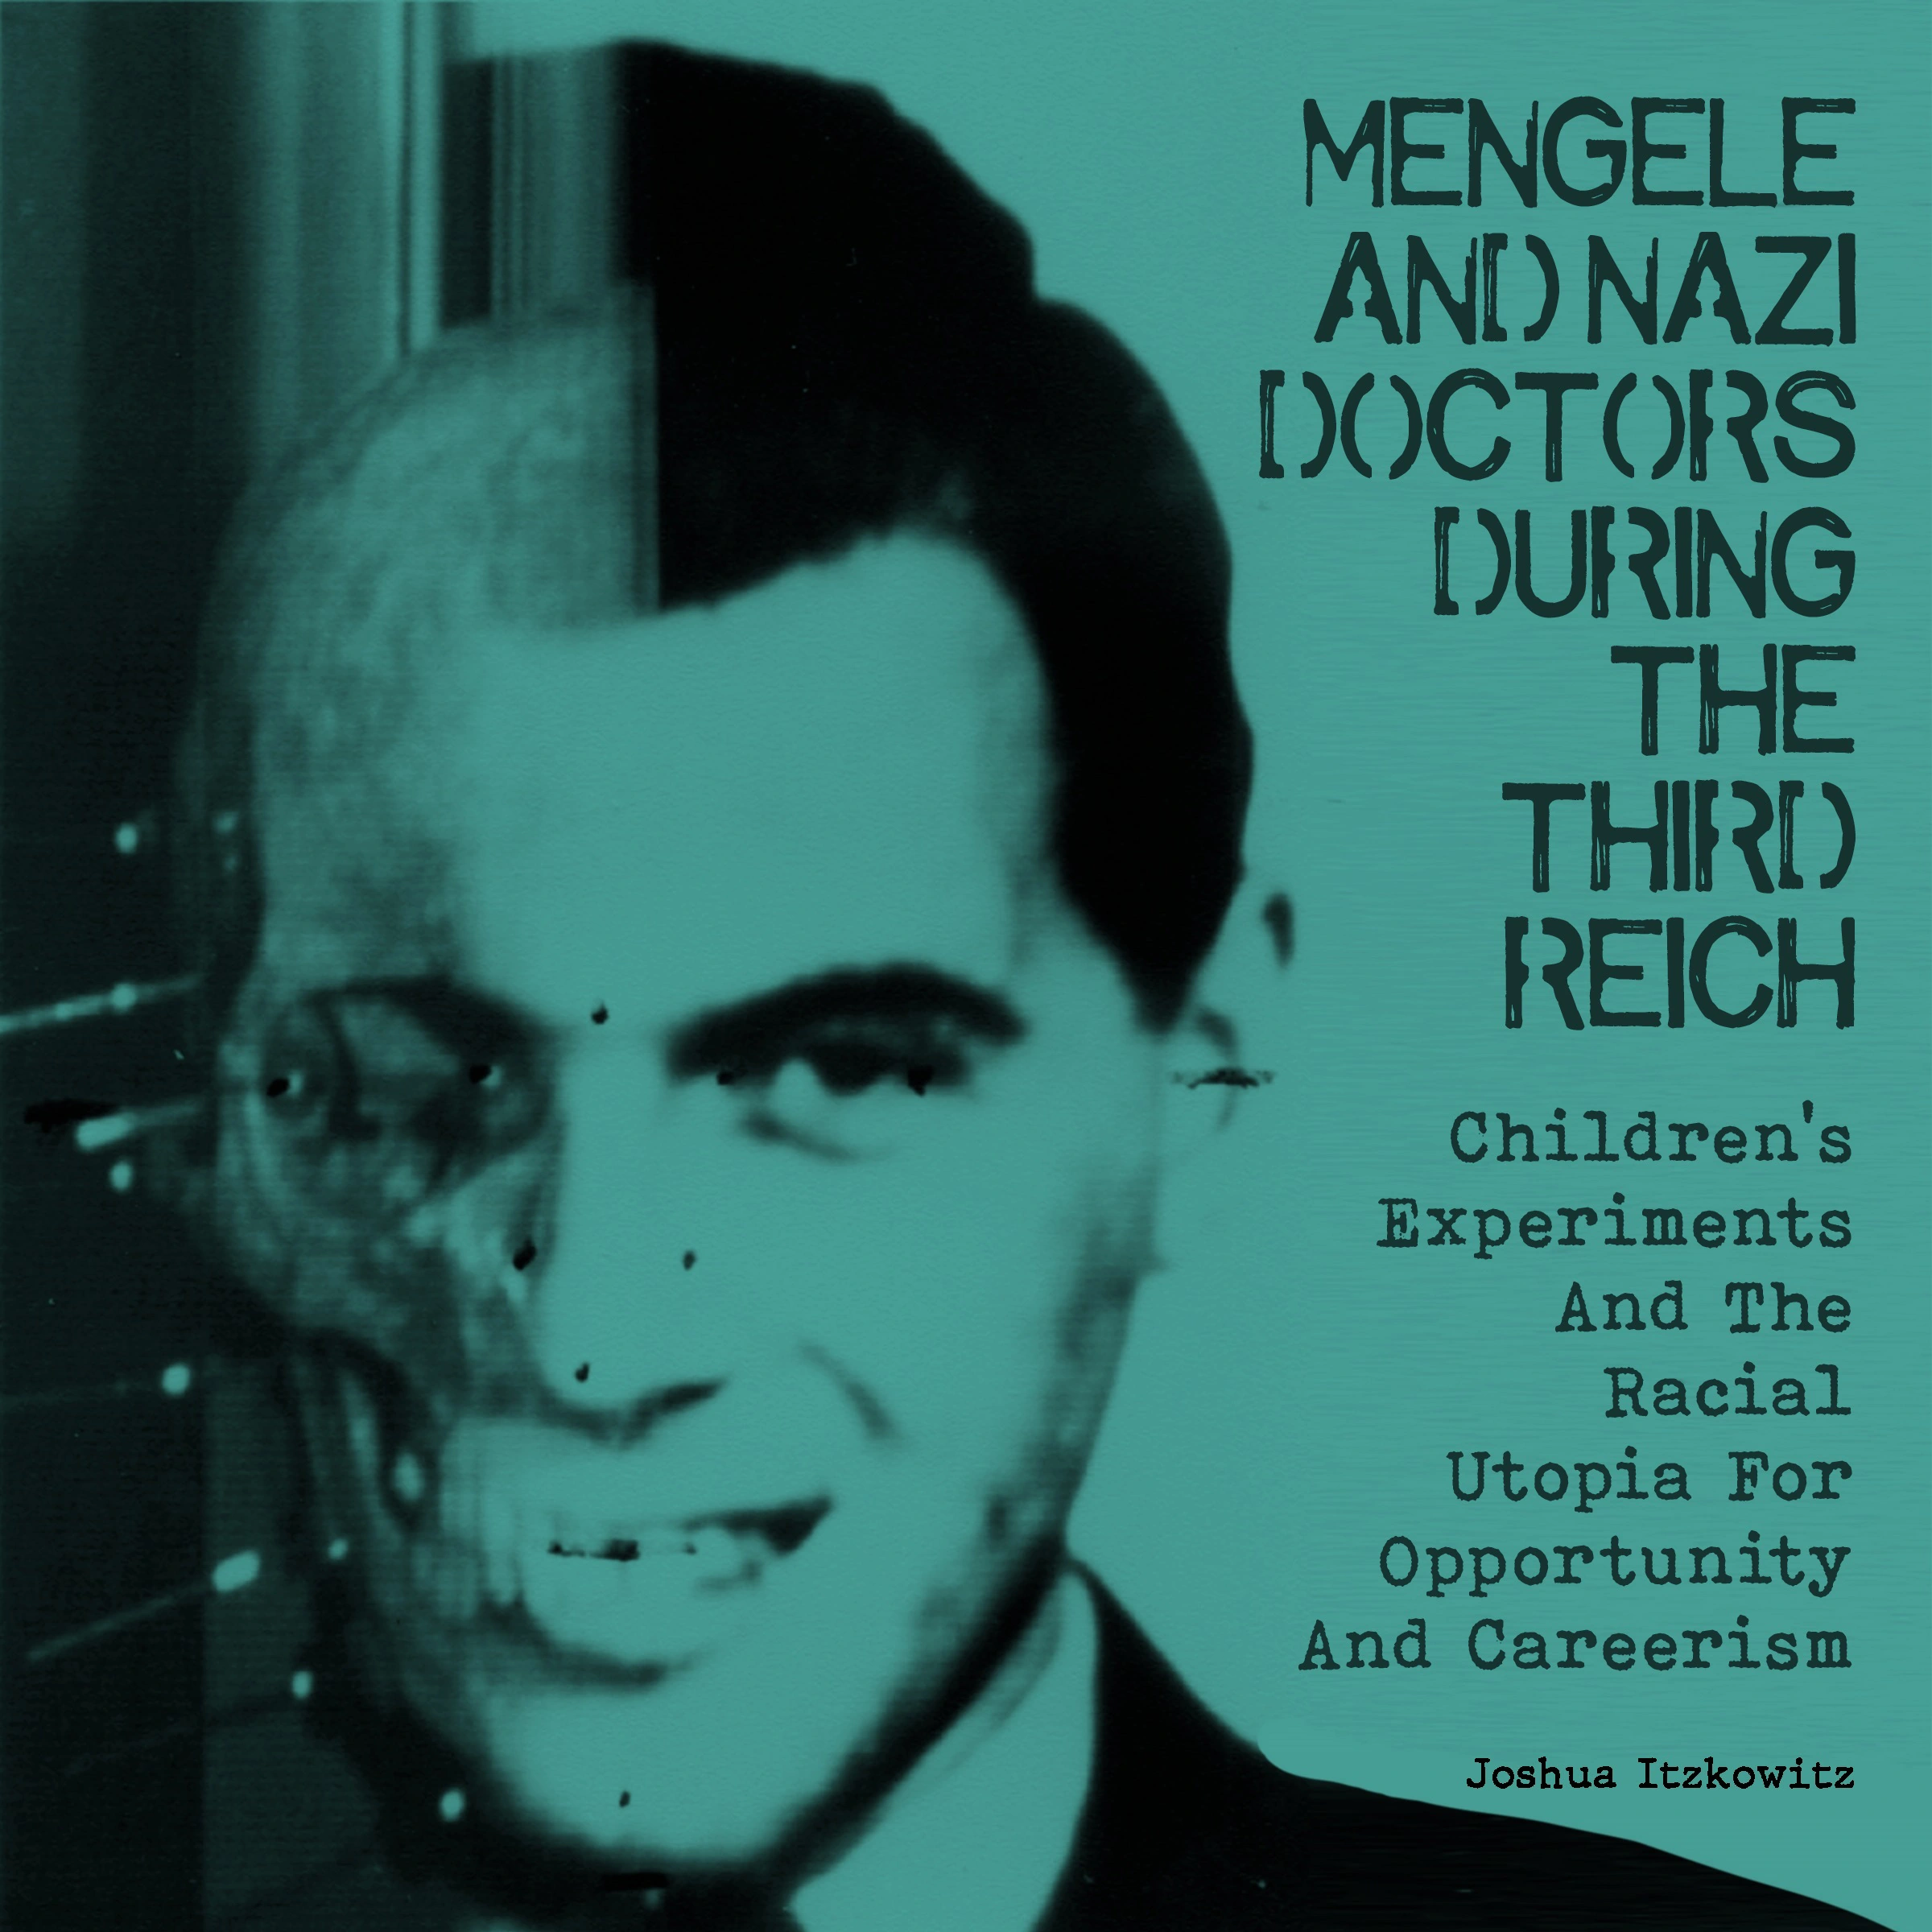 Mengele And Nazi Doctors During The Third Reich by Joshua Itzkowitz Audiobook